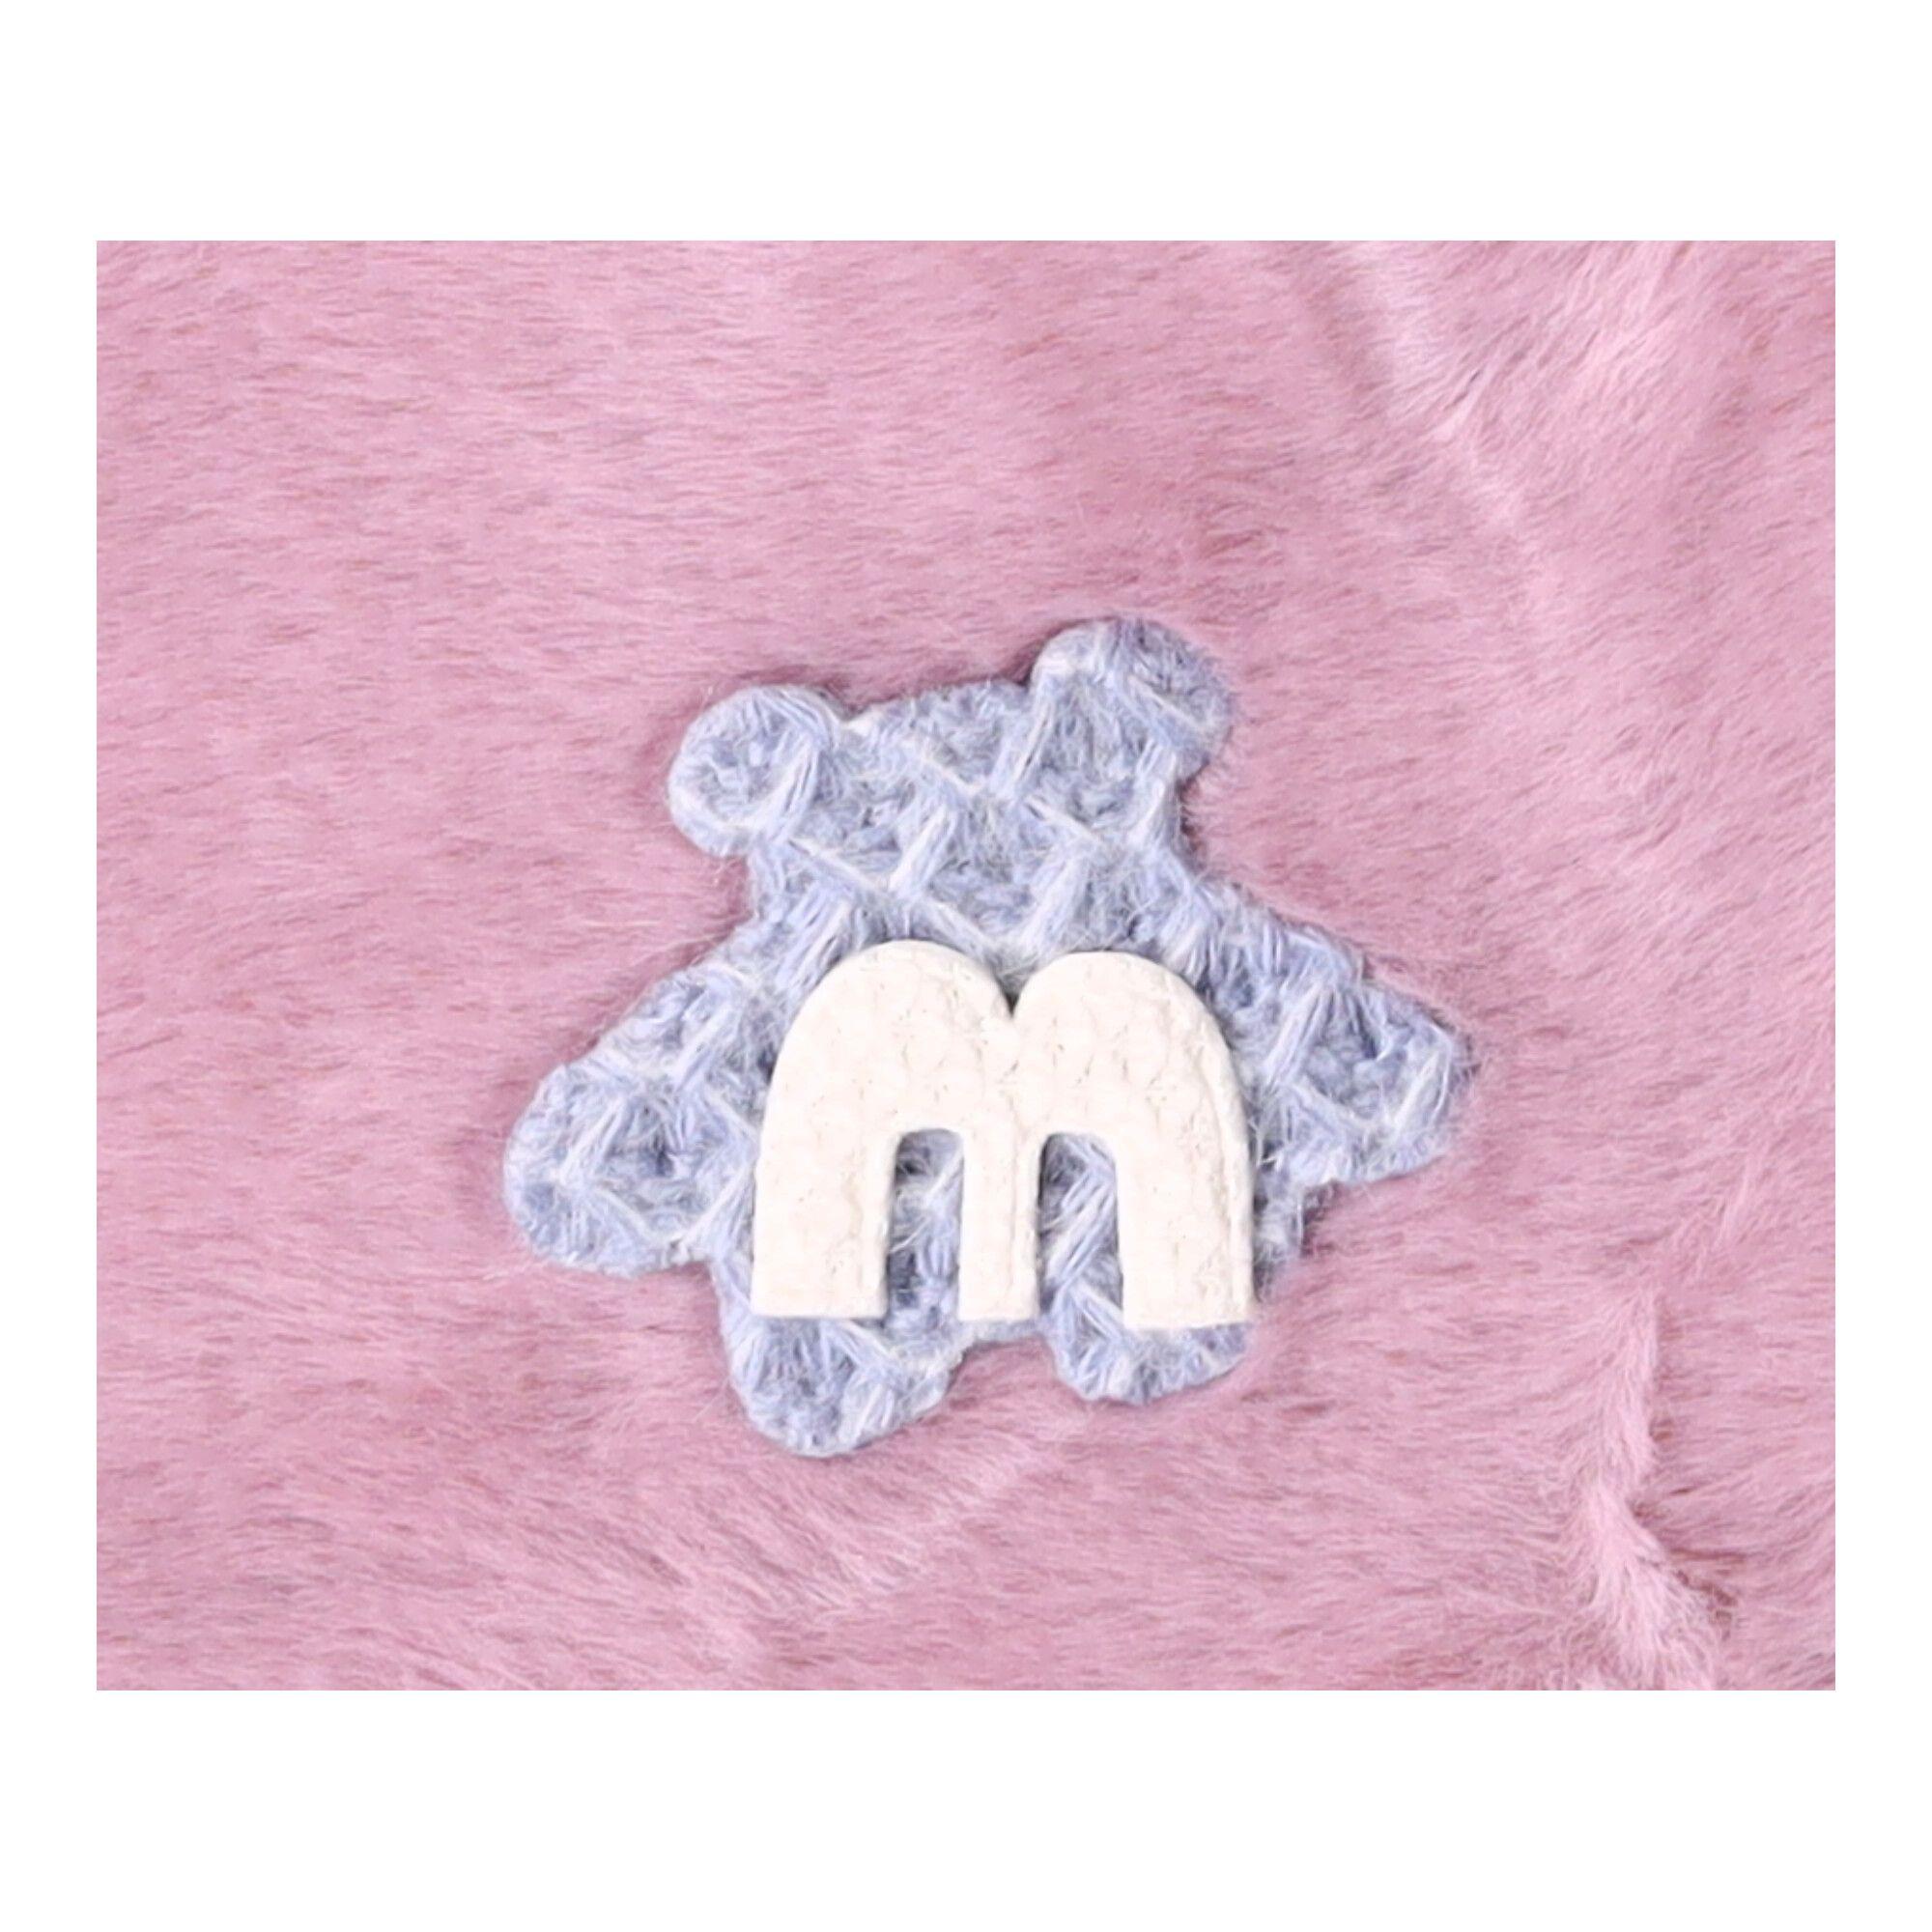 Plush hot water bottle, hot water bottle in a sweater 2L - pink, with a teddy bear